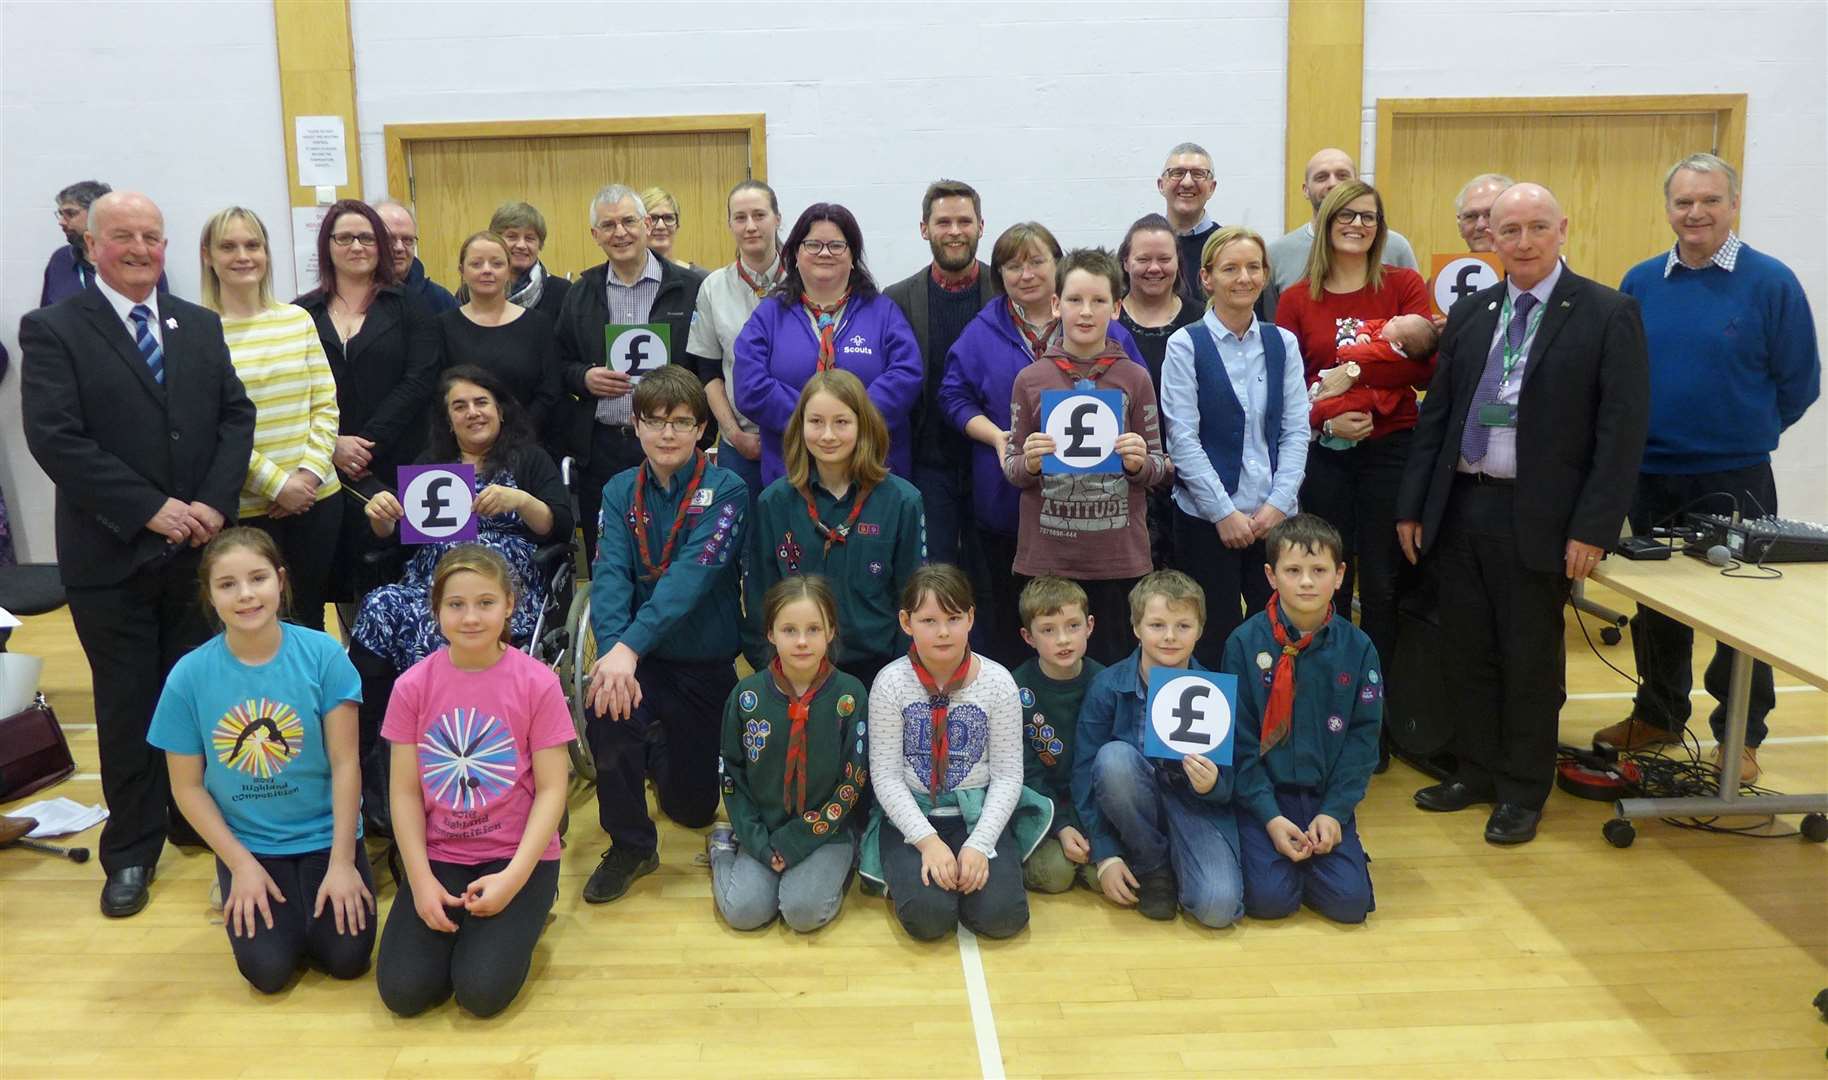 Representatives of the groups that were awarded funding at the fifth Your Cash Your Caithness held in the Pulteney Centre, Wick, in January 2019, along with Councillor Willie Mackay, council chief executive Donna Manson and ward manager Alex Macmanus. The next event is scheduled for Thurso High School on Saturday, February 29.